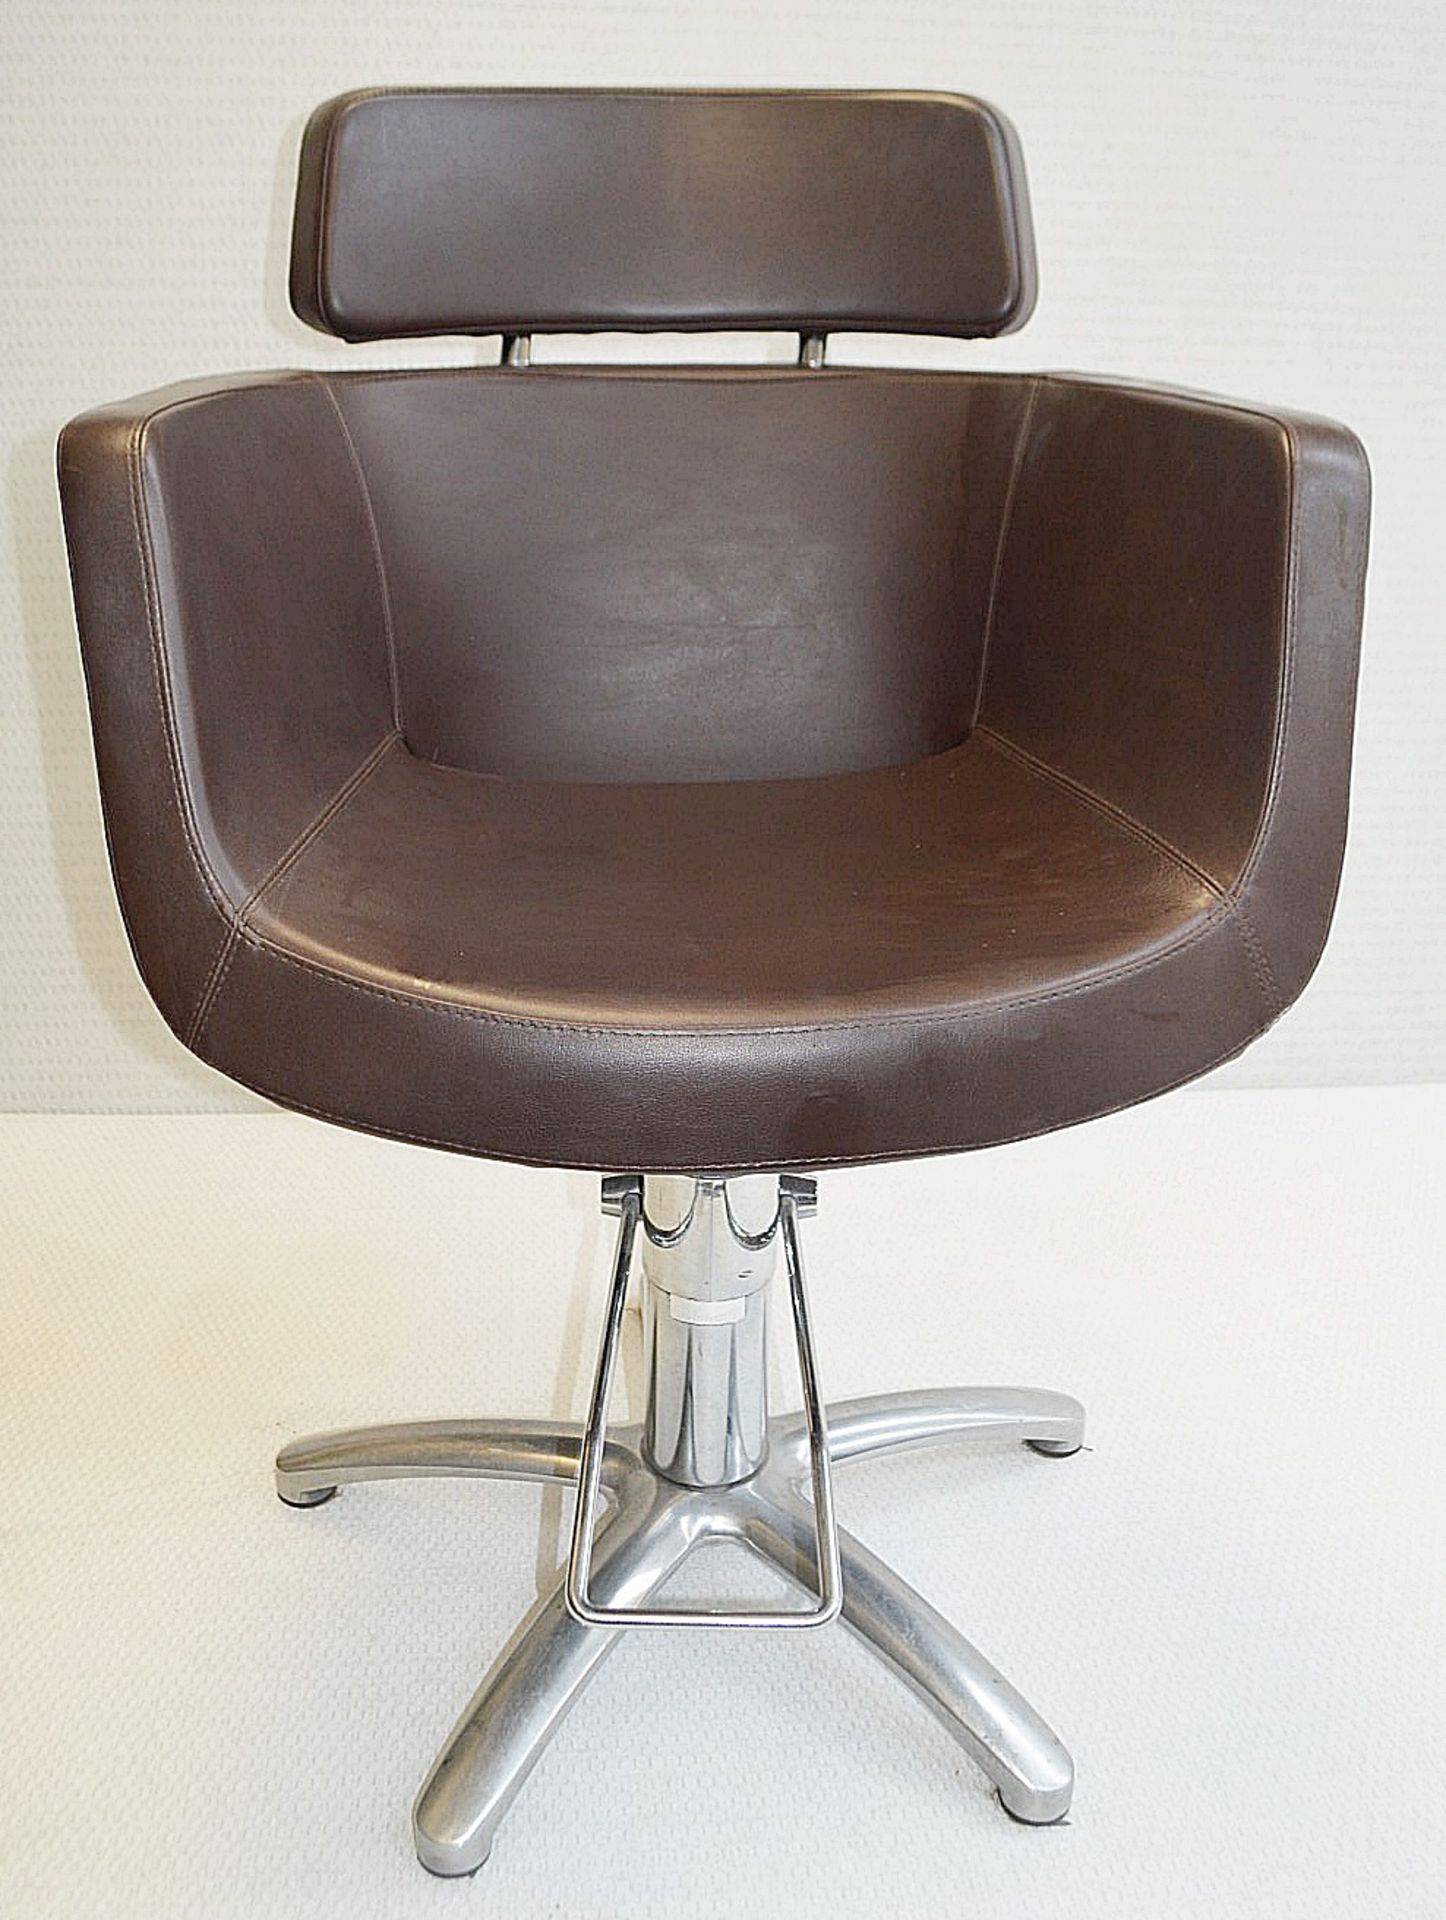 5 x Malet Branded Professional Hairdressing Salon Swivel Chairs In Brown - Each Is Supplied With A - Image 2 of 7